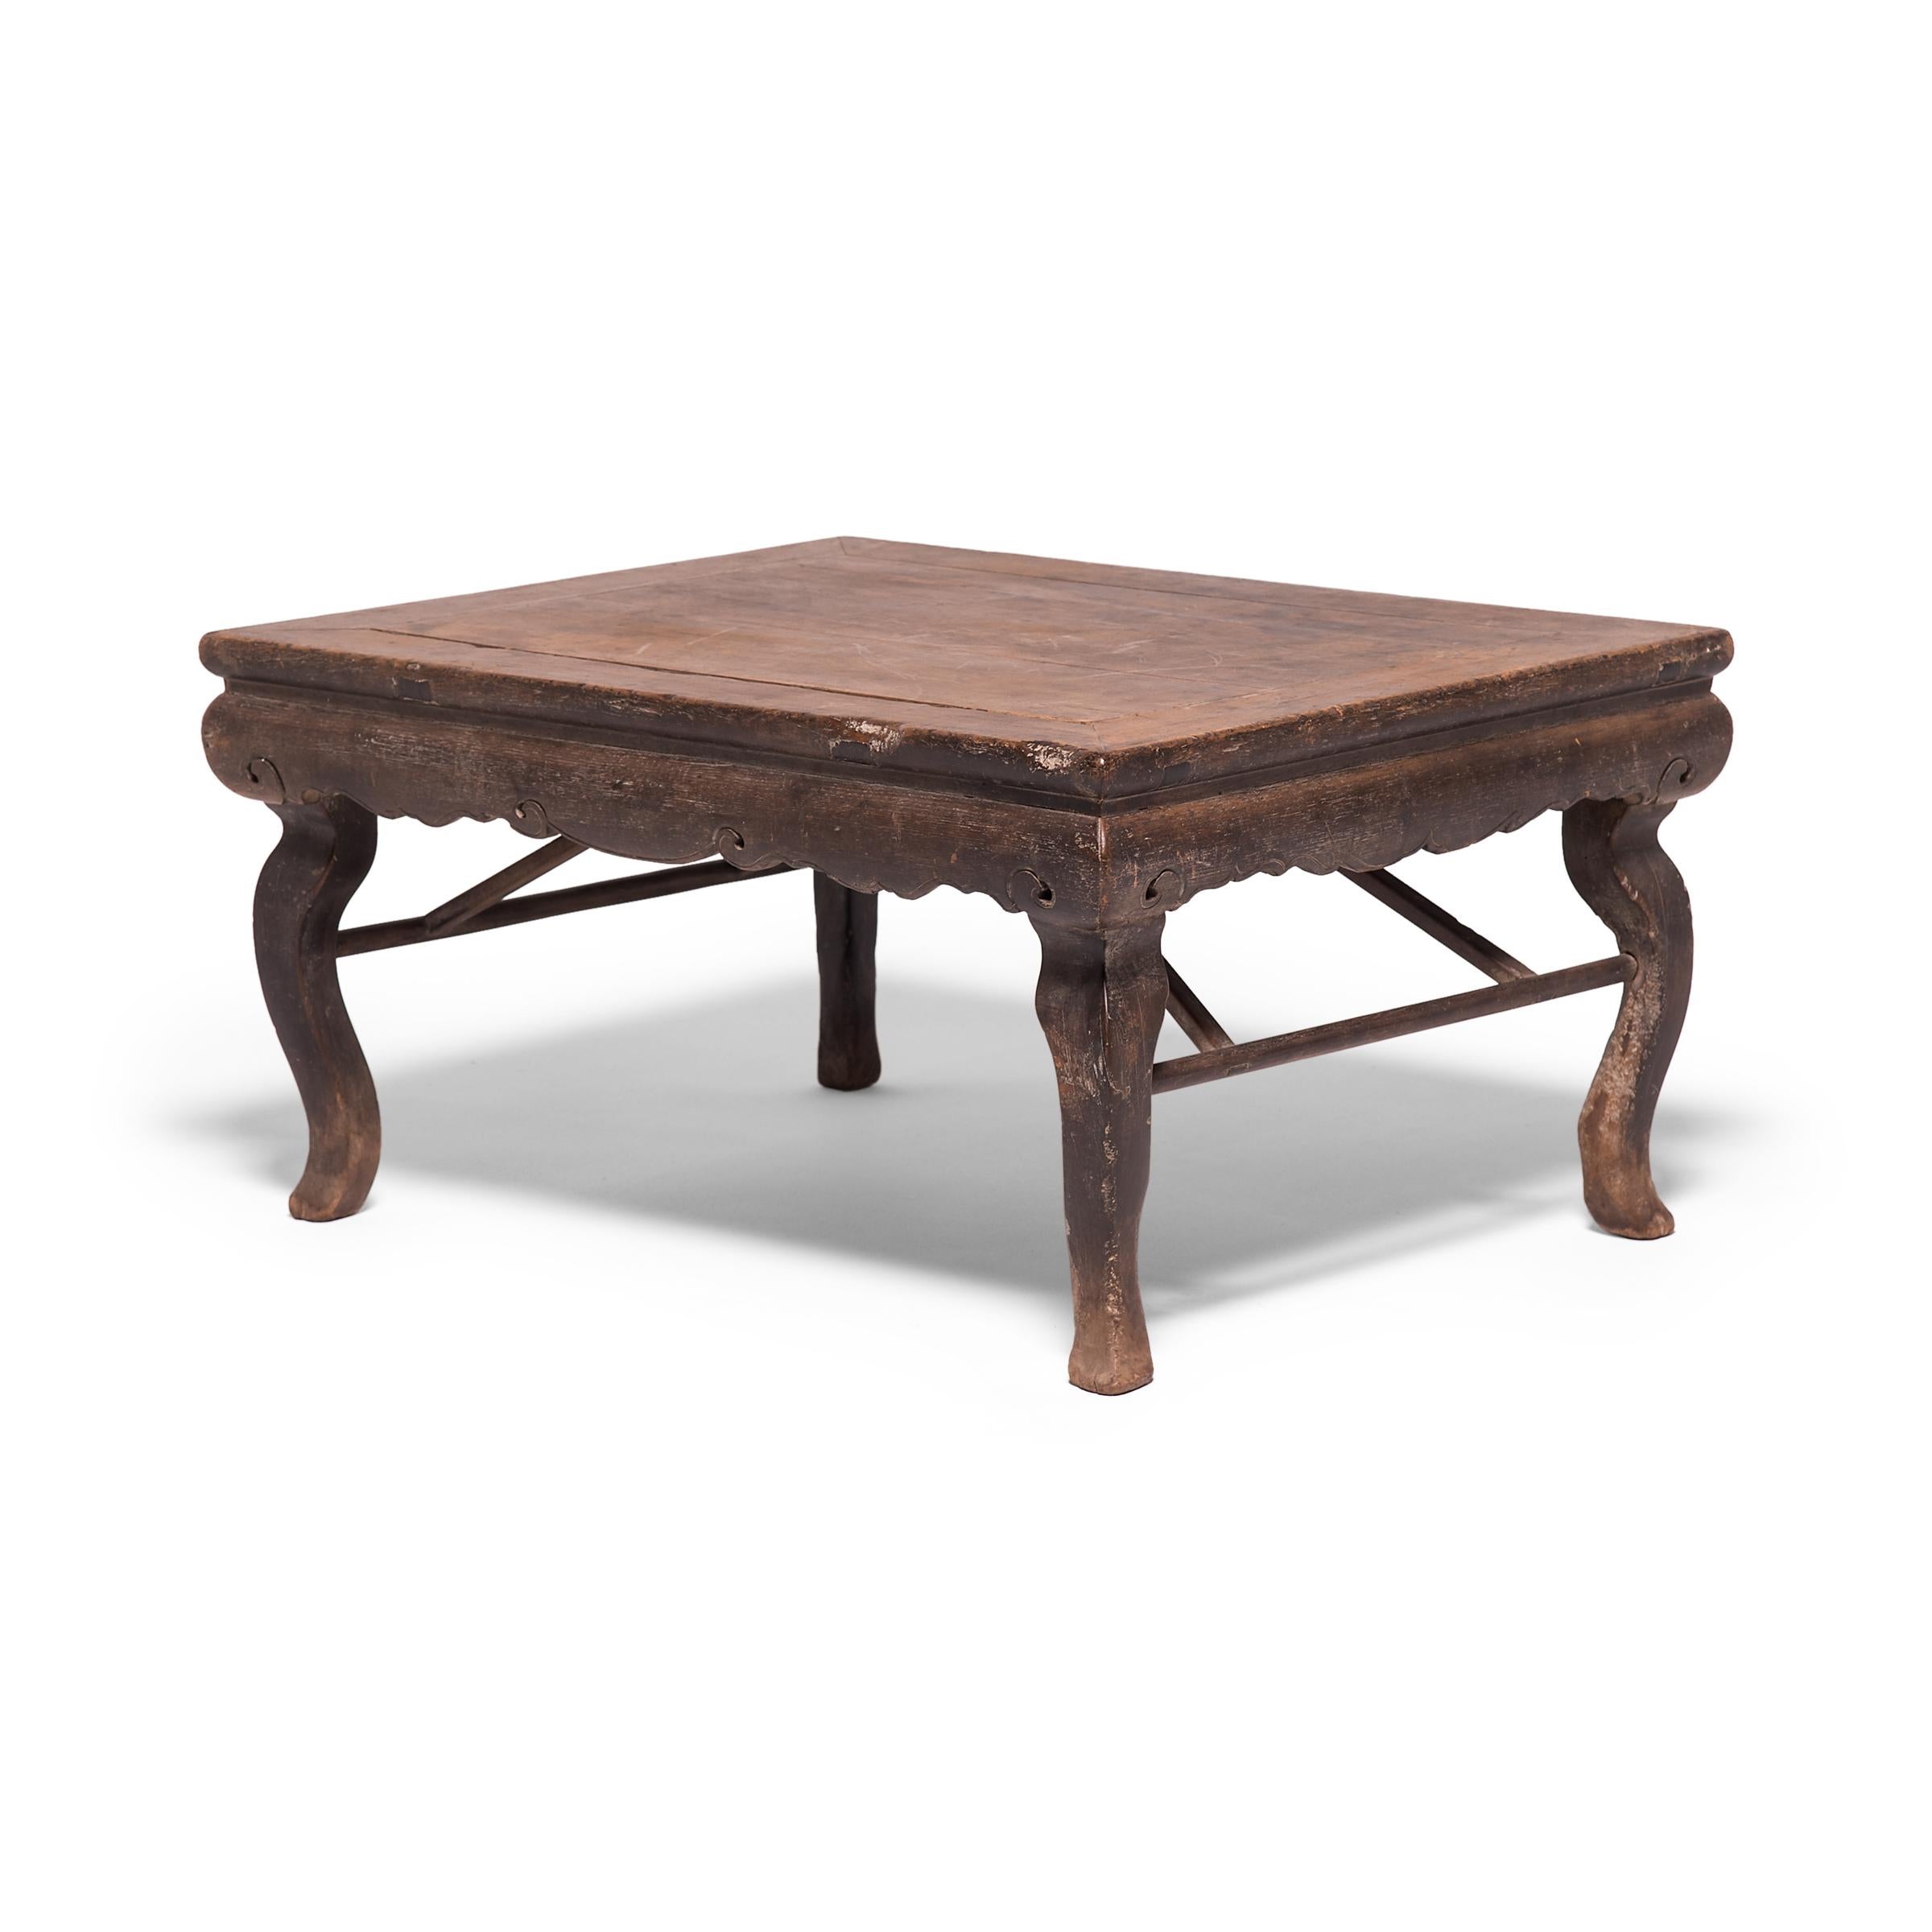 This table was designed centuries ago to accompany Chinese artists and scholars on excursions into gardens, forests, and fields. It would have been used for painting sessions, poetry readings, picnics, and ancient drinking games known as yaji. The